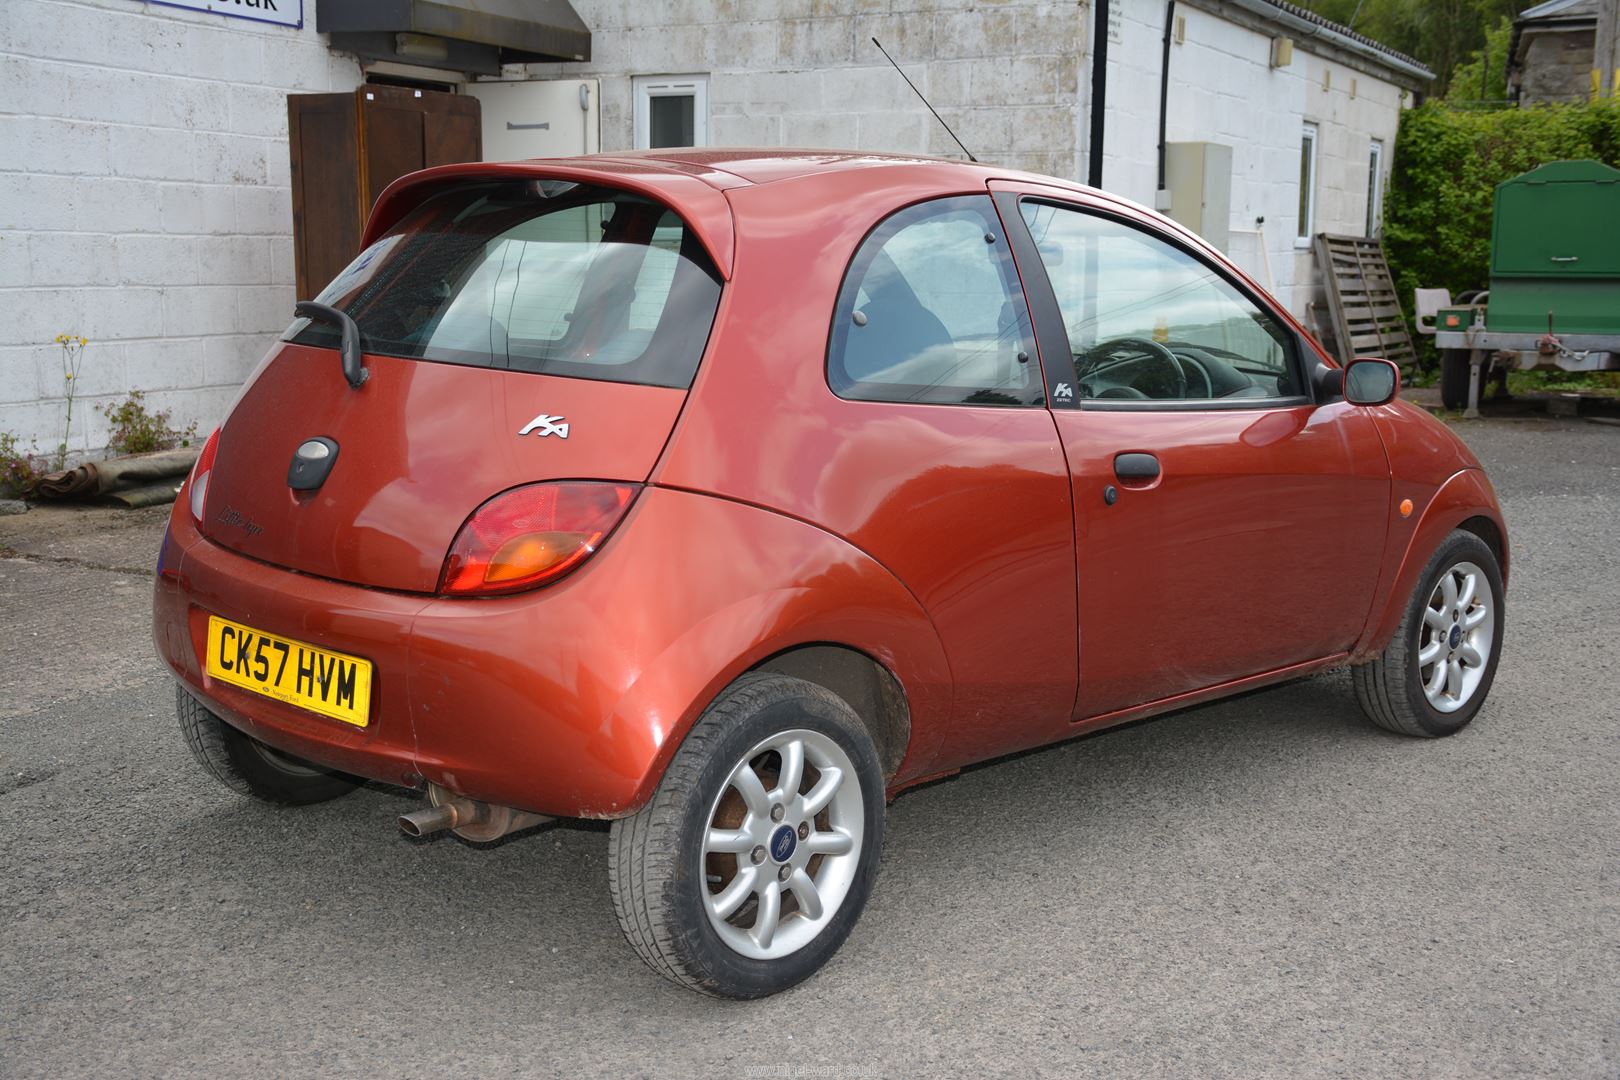 A Ford KA Zetec Climate 1299cc petrol-engined three door hatchback motor Car finished in red, - Image 7 of 14